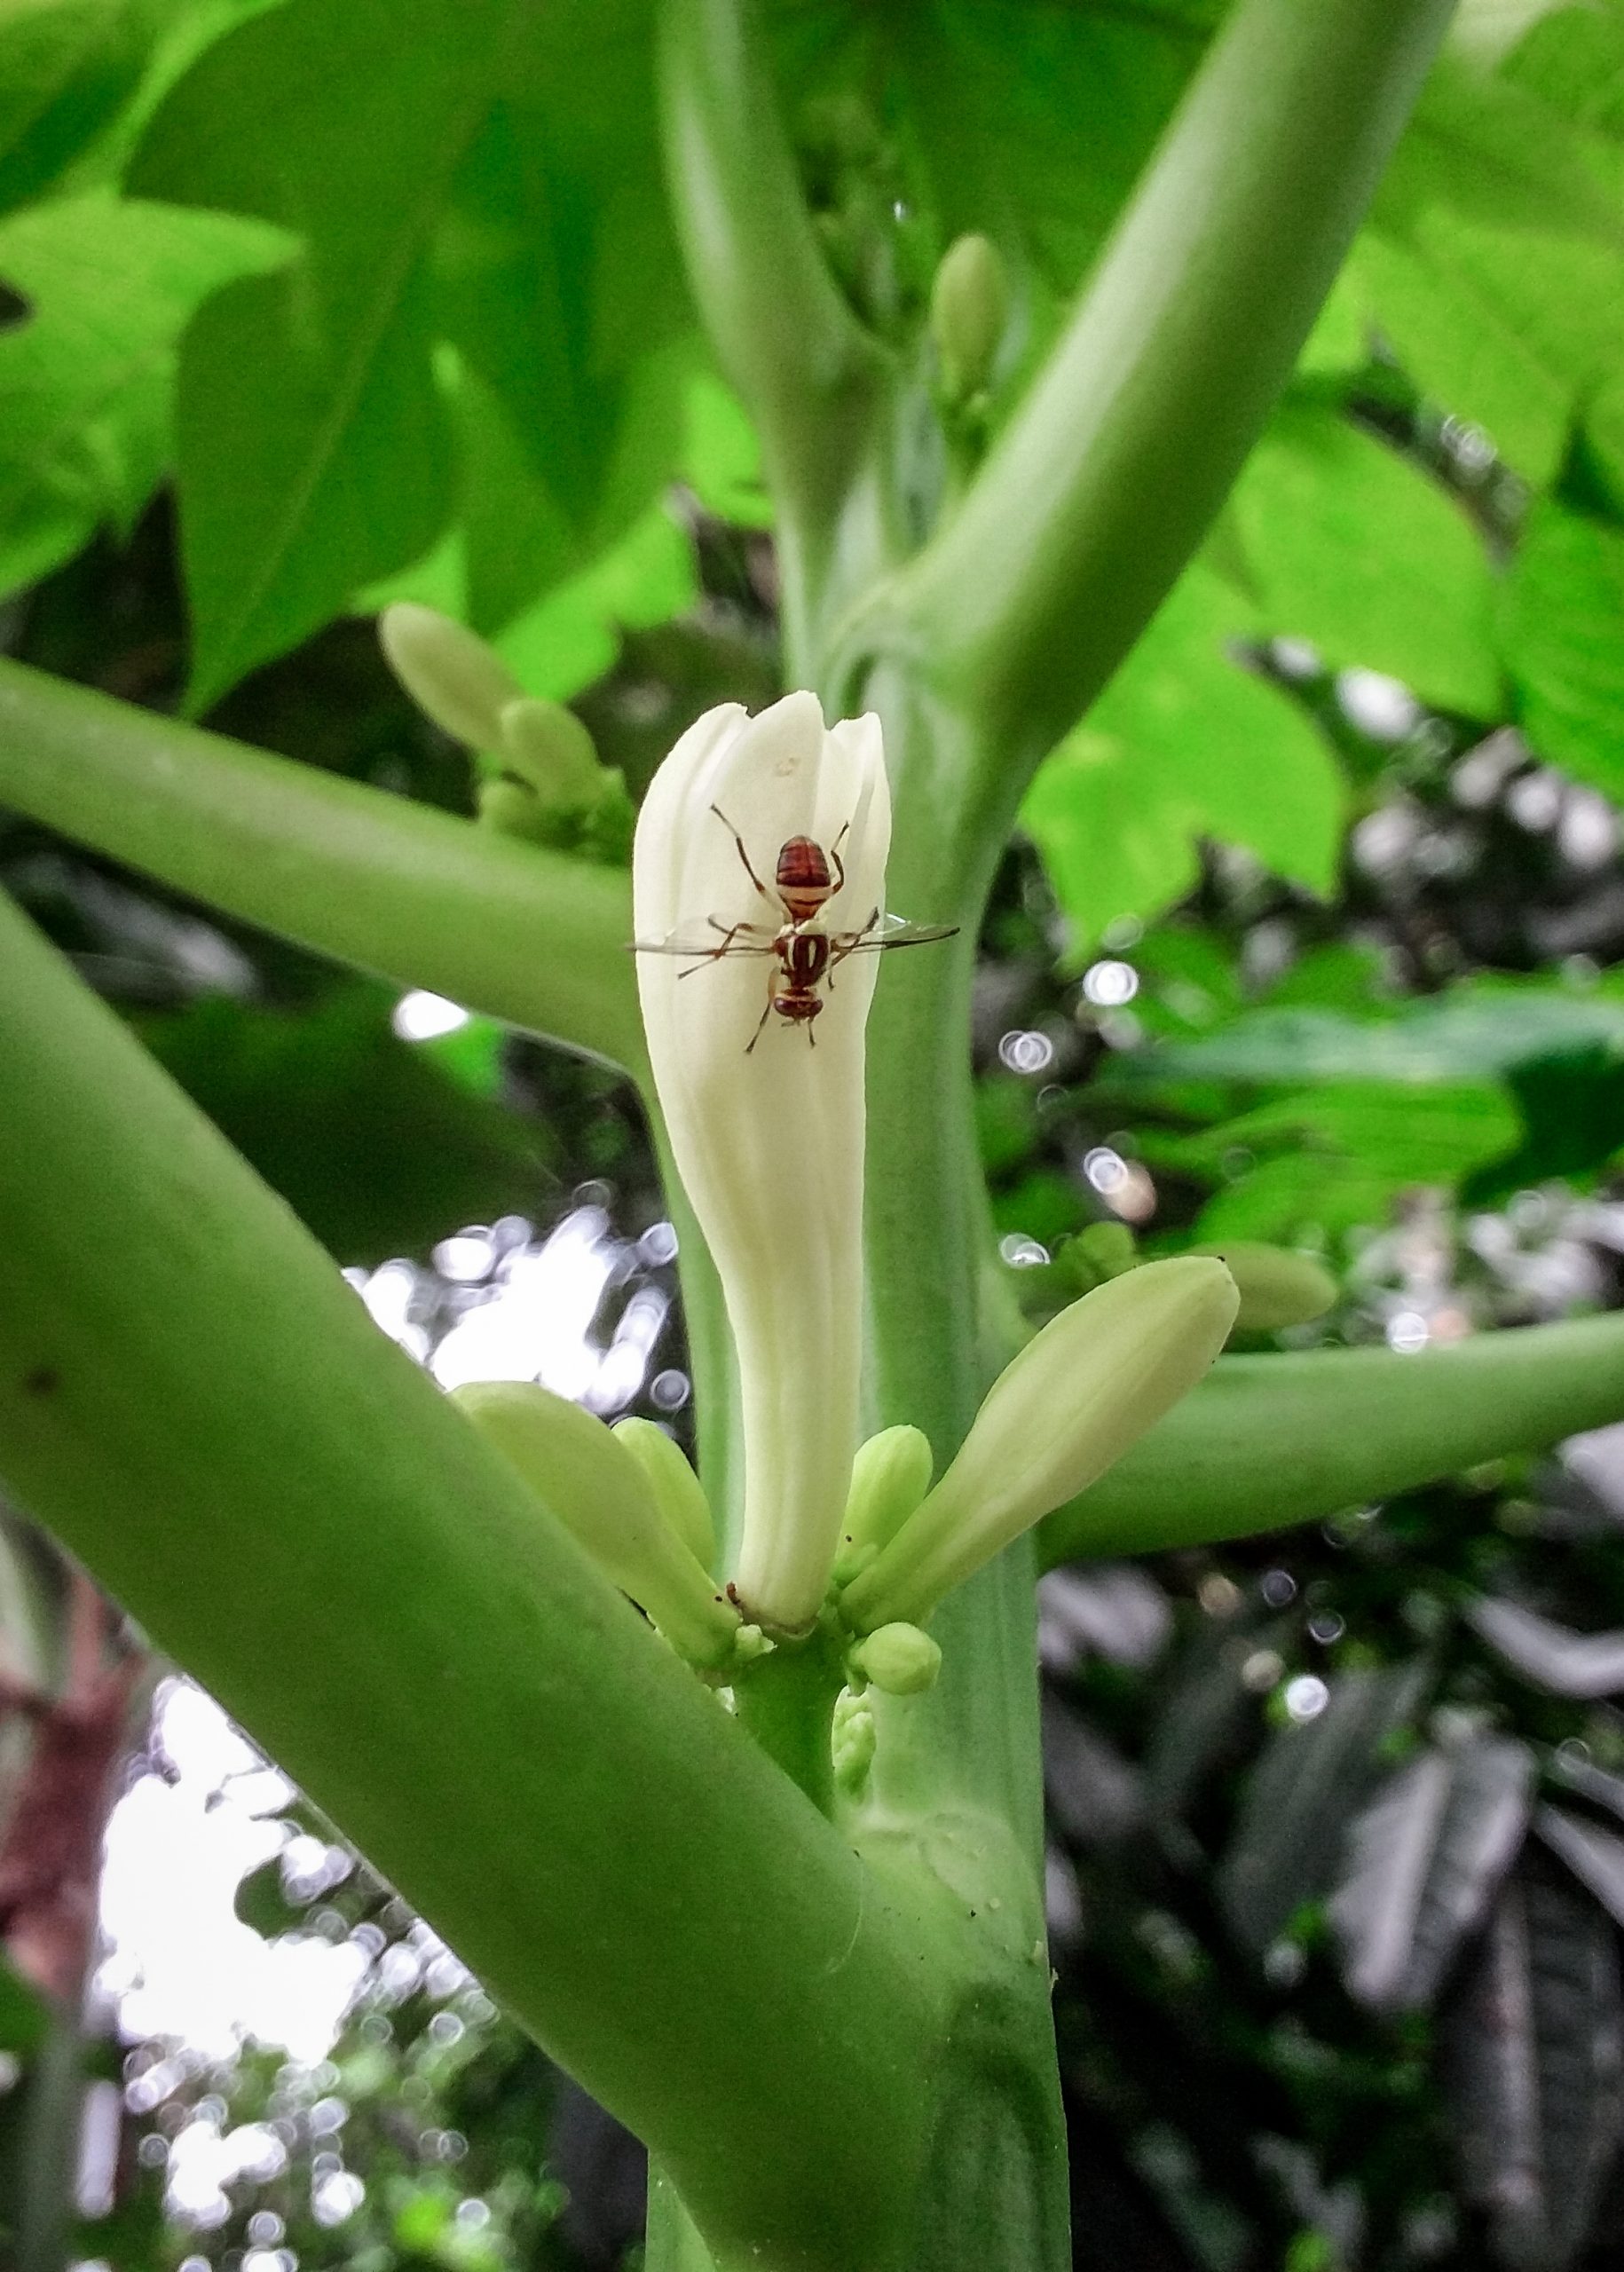 An insect on a flower bud